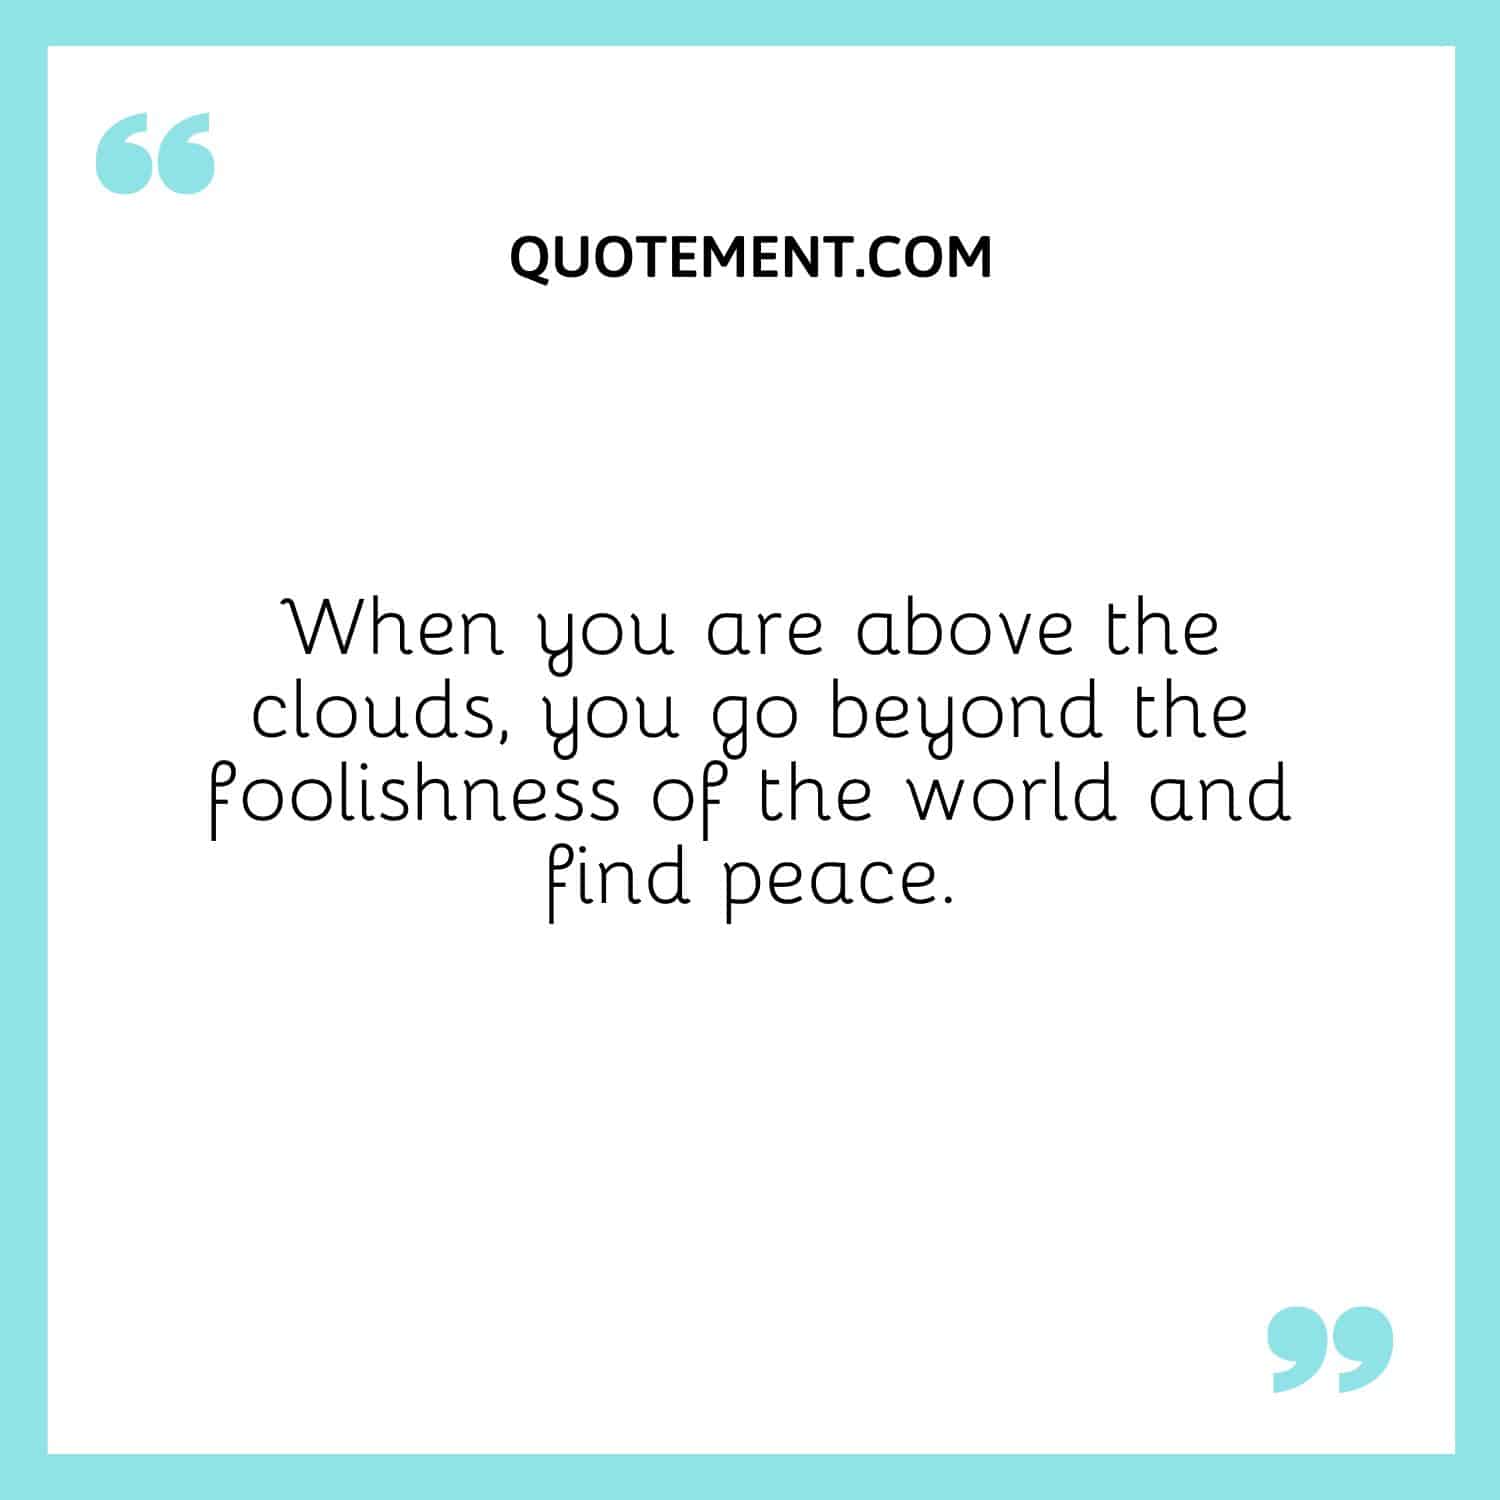 When you are above the clouds, you go beyond the foolishness of the world and find peace.